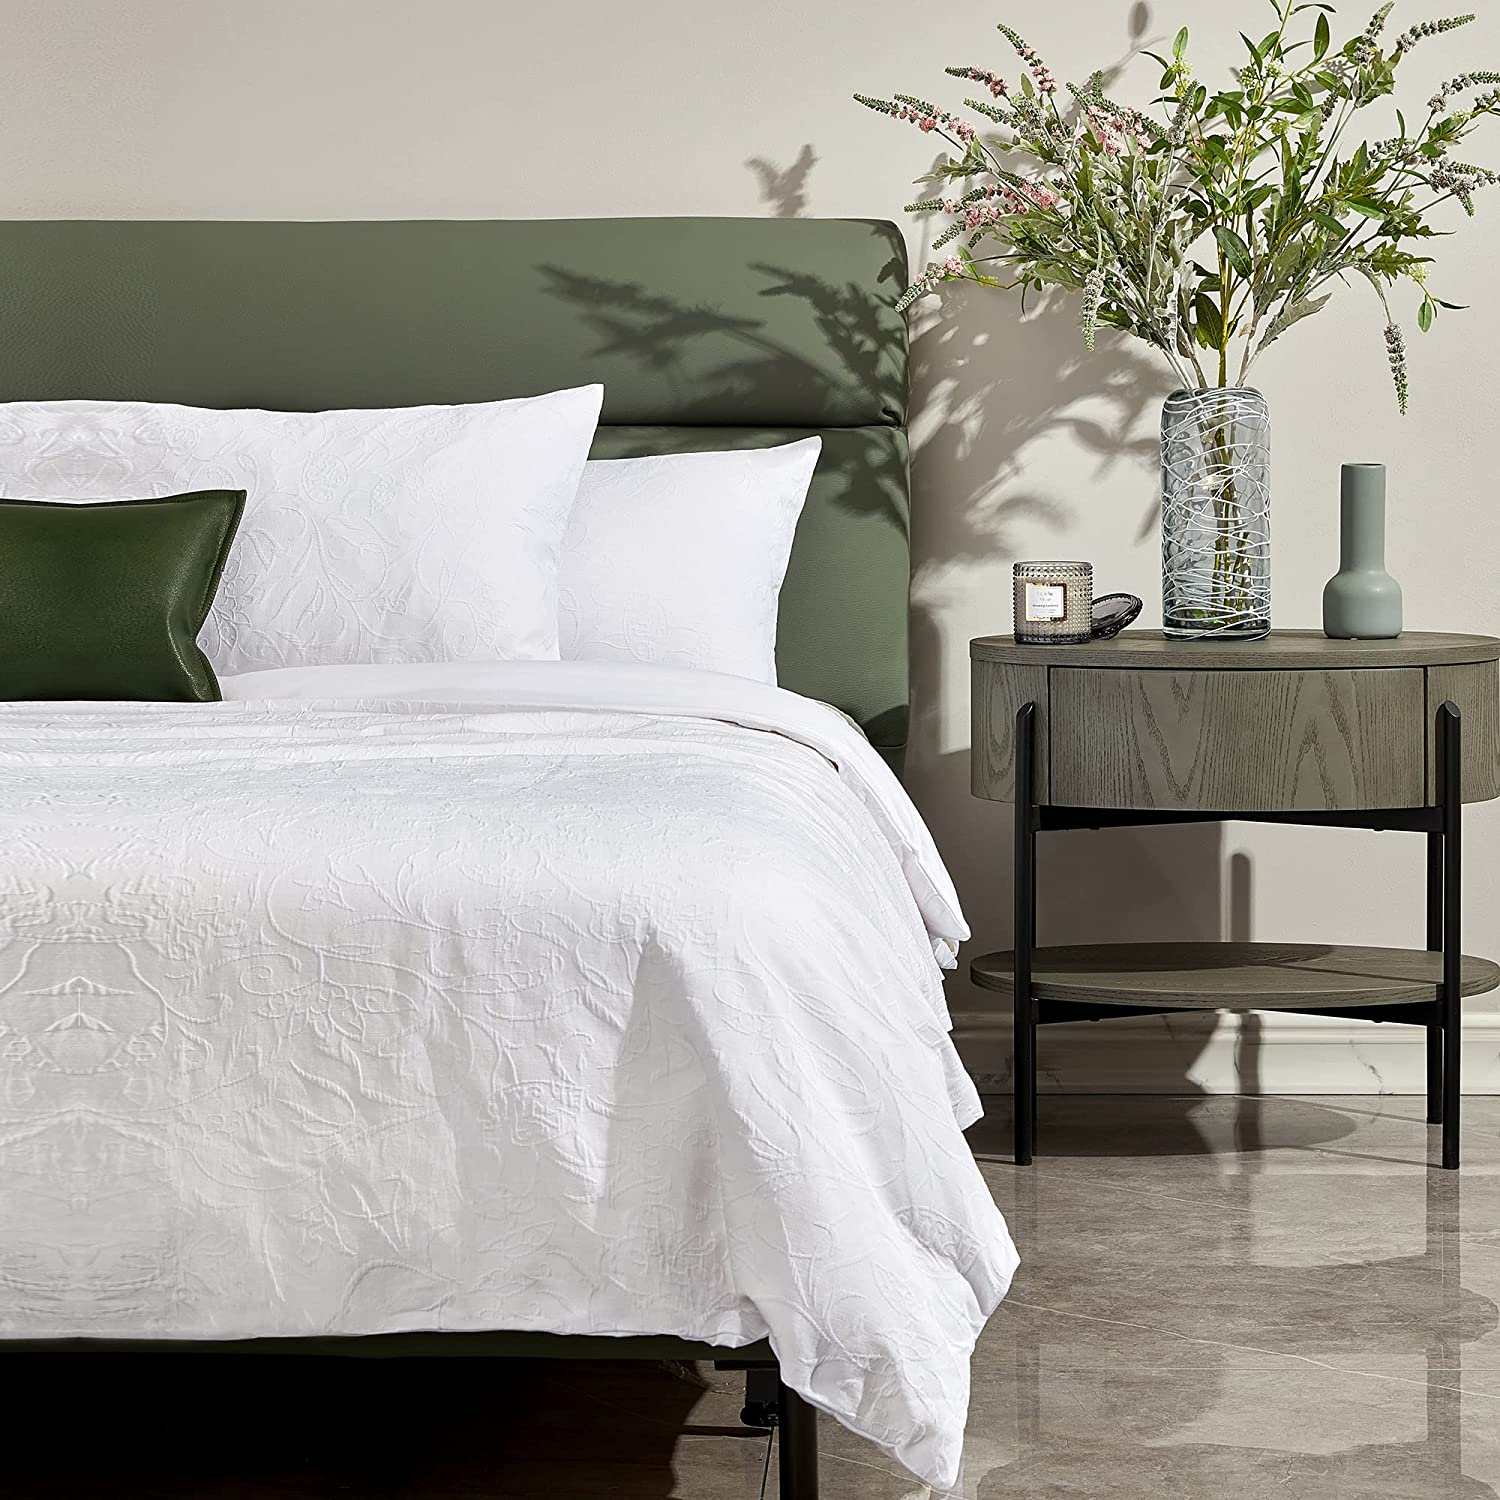 Price:$109.98  Jolie Muse King Size Duvet Cover Set of 3 with Embossed Floral Pattern, White, Natural Cotton Bedding Set, Combo of Duvet Cover and Sham Covers : Home & Kitchen